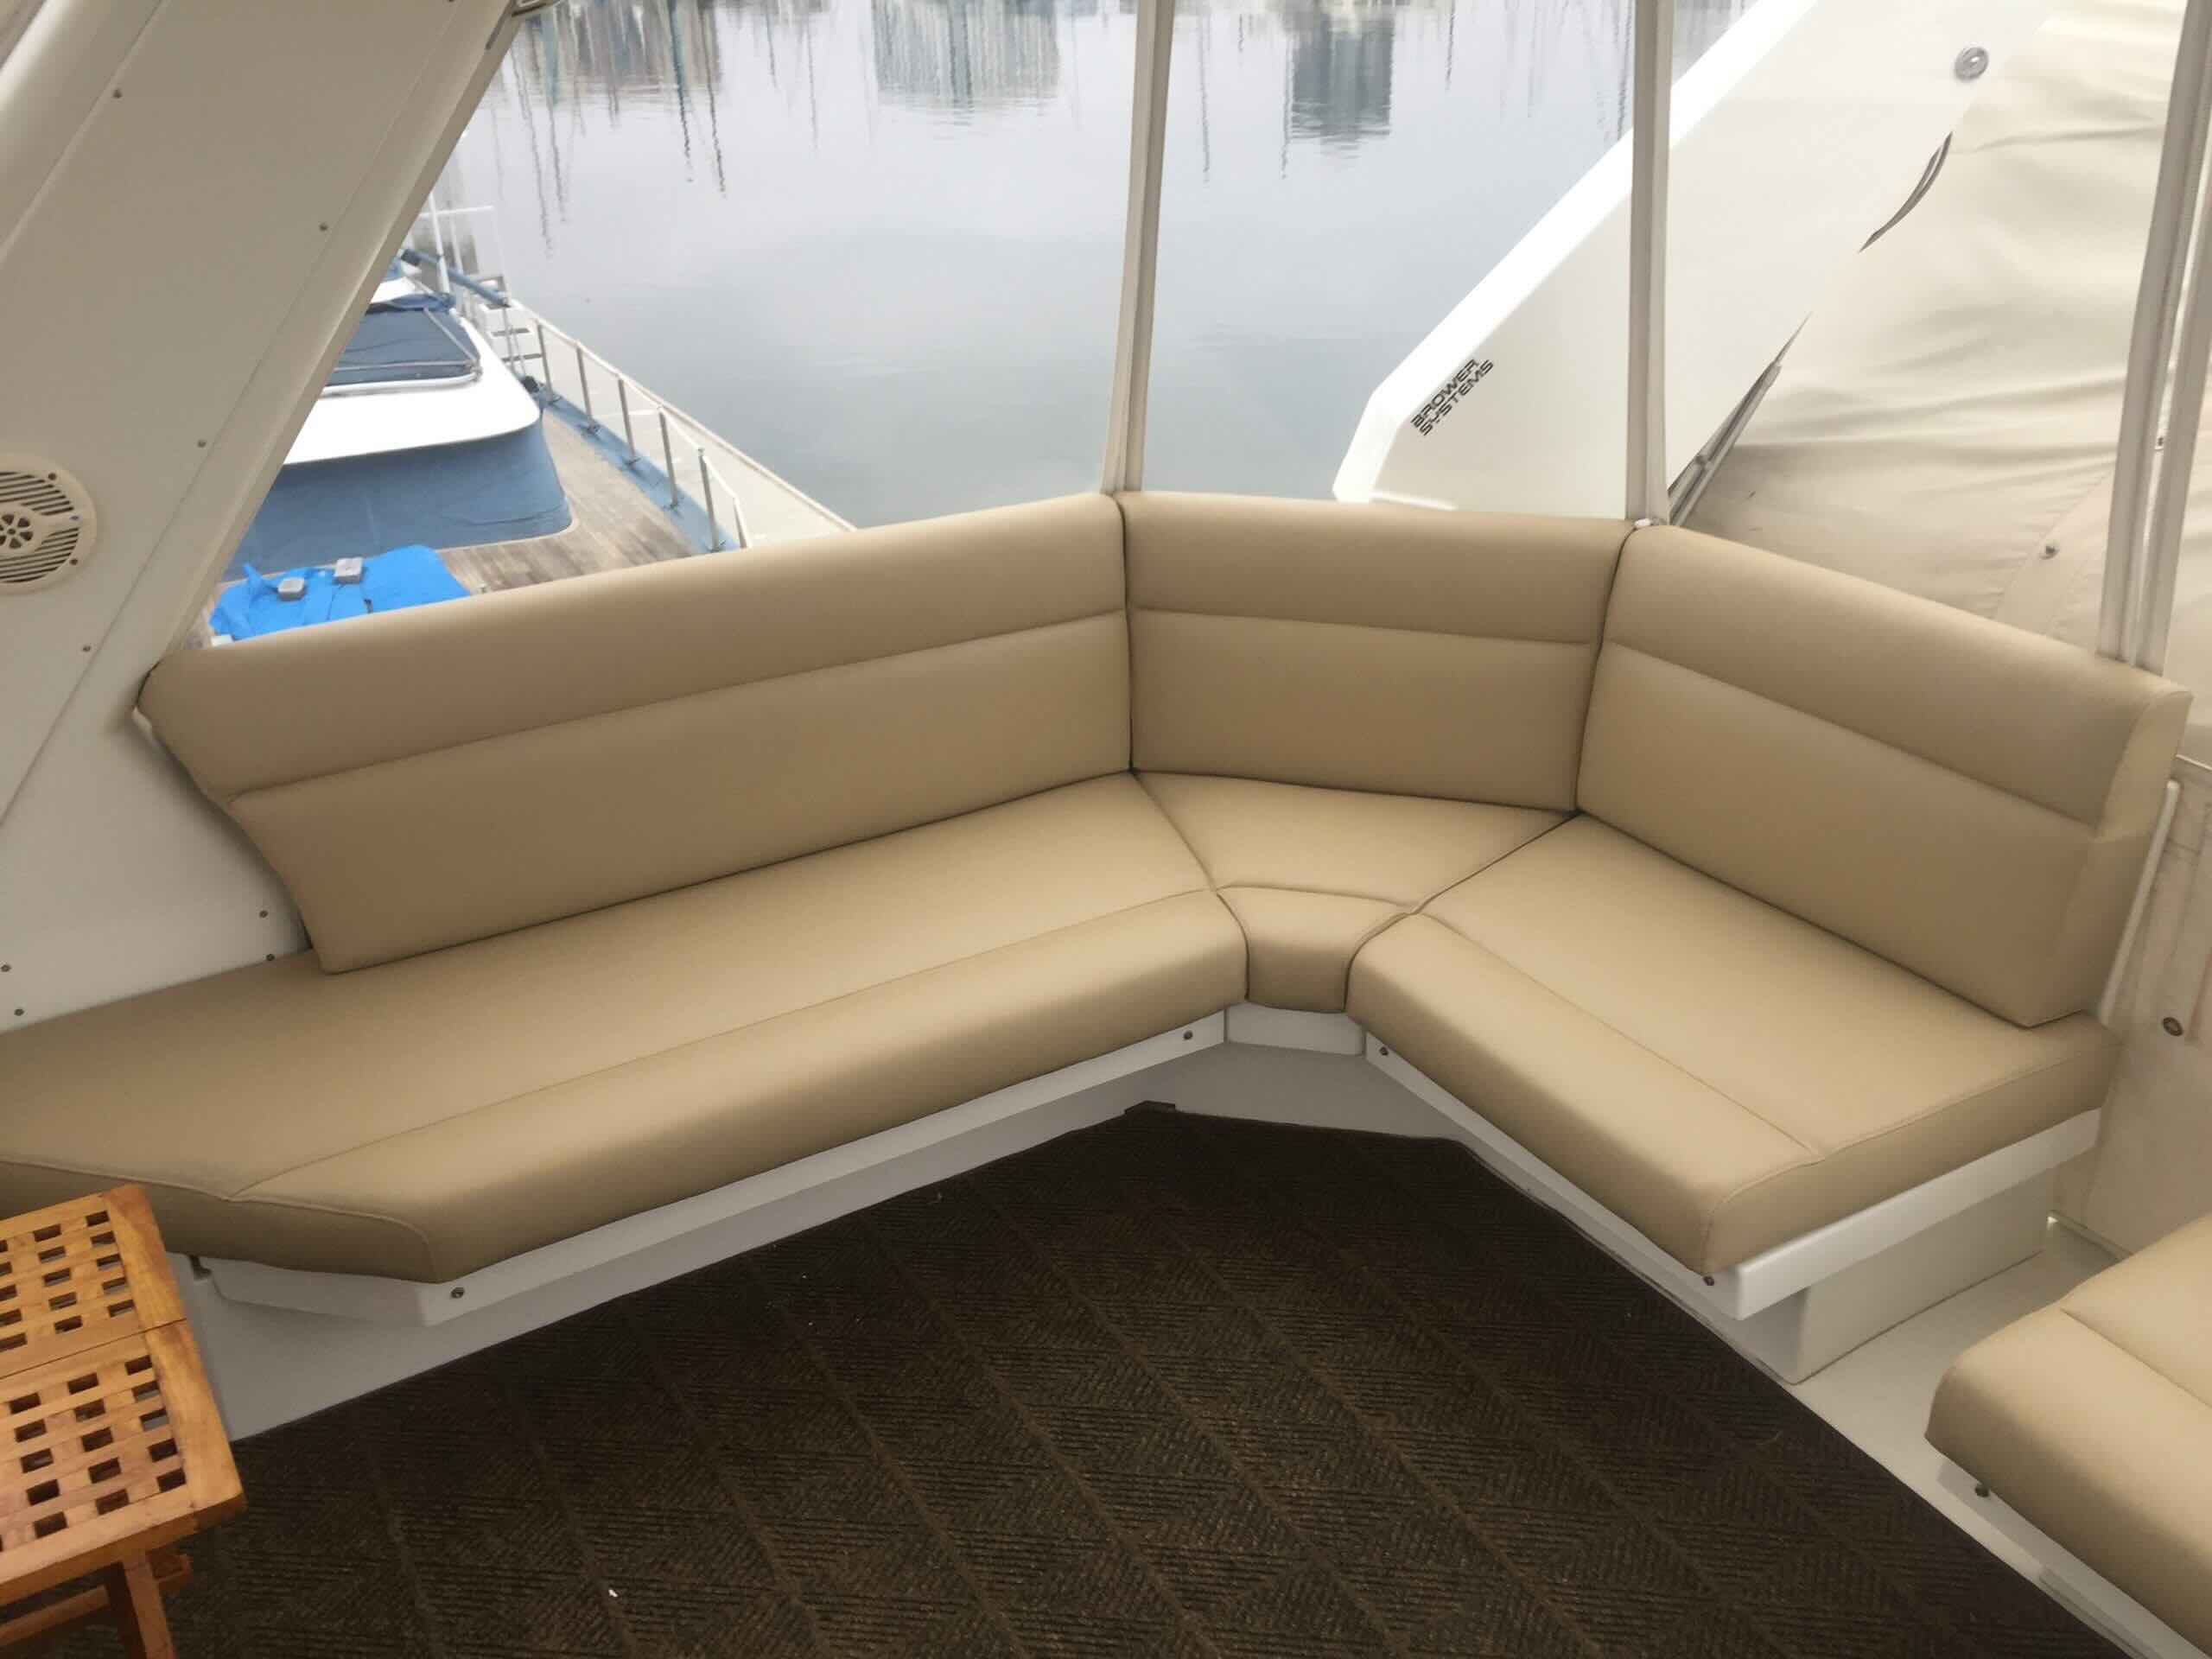 How To Recover Boat Cushions